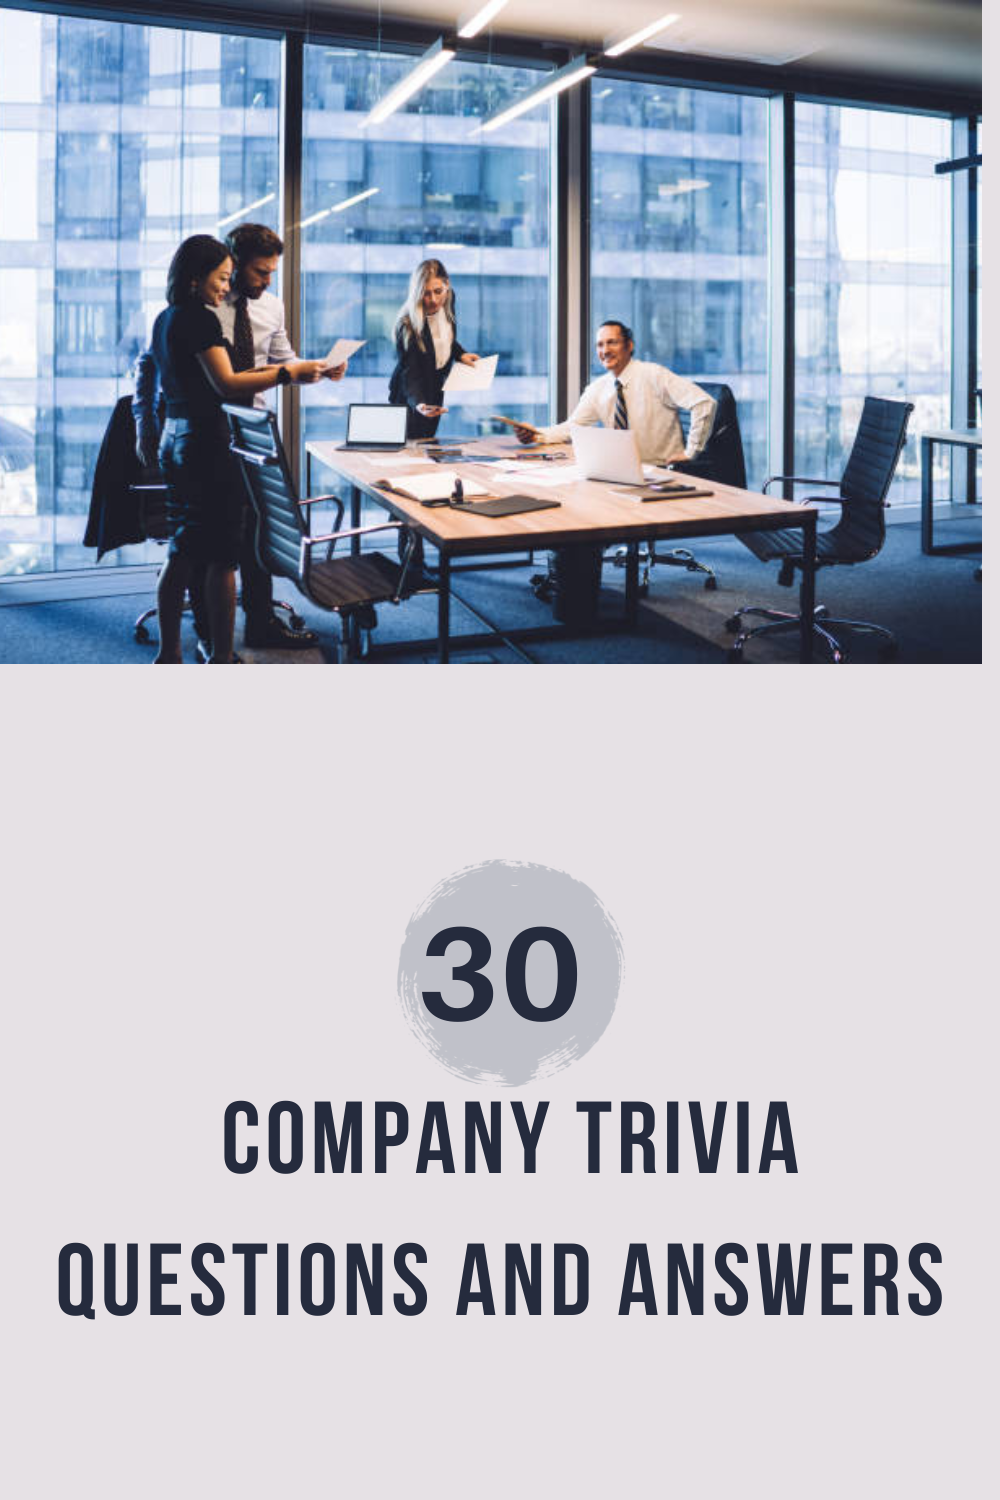 Company Trivia Questions and Answers